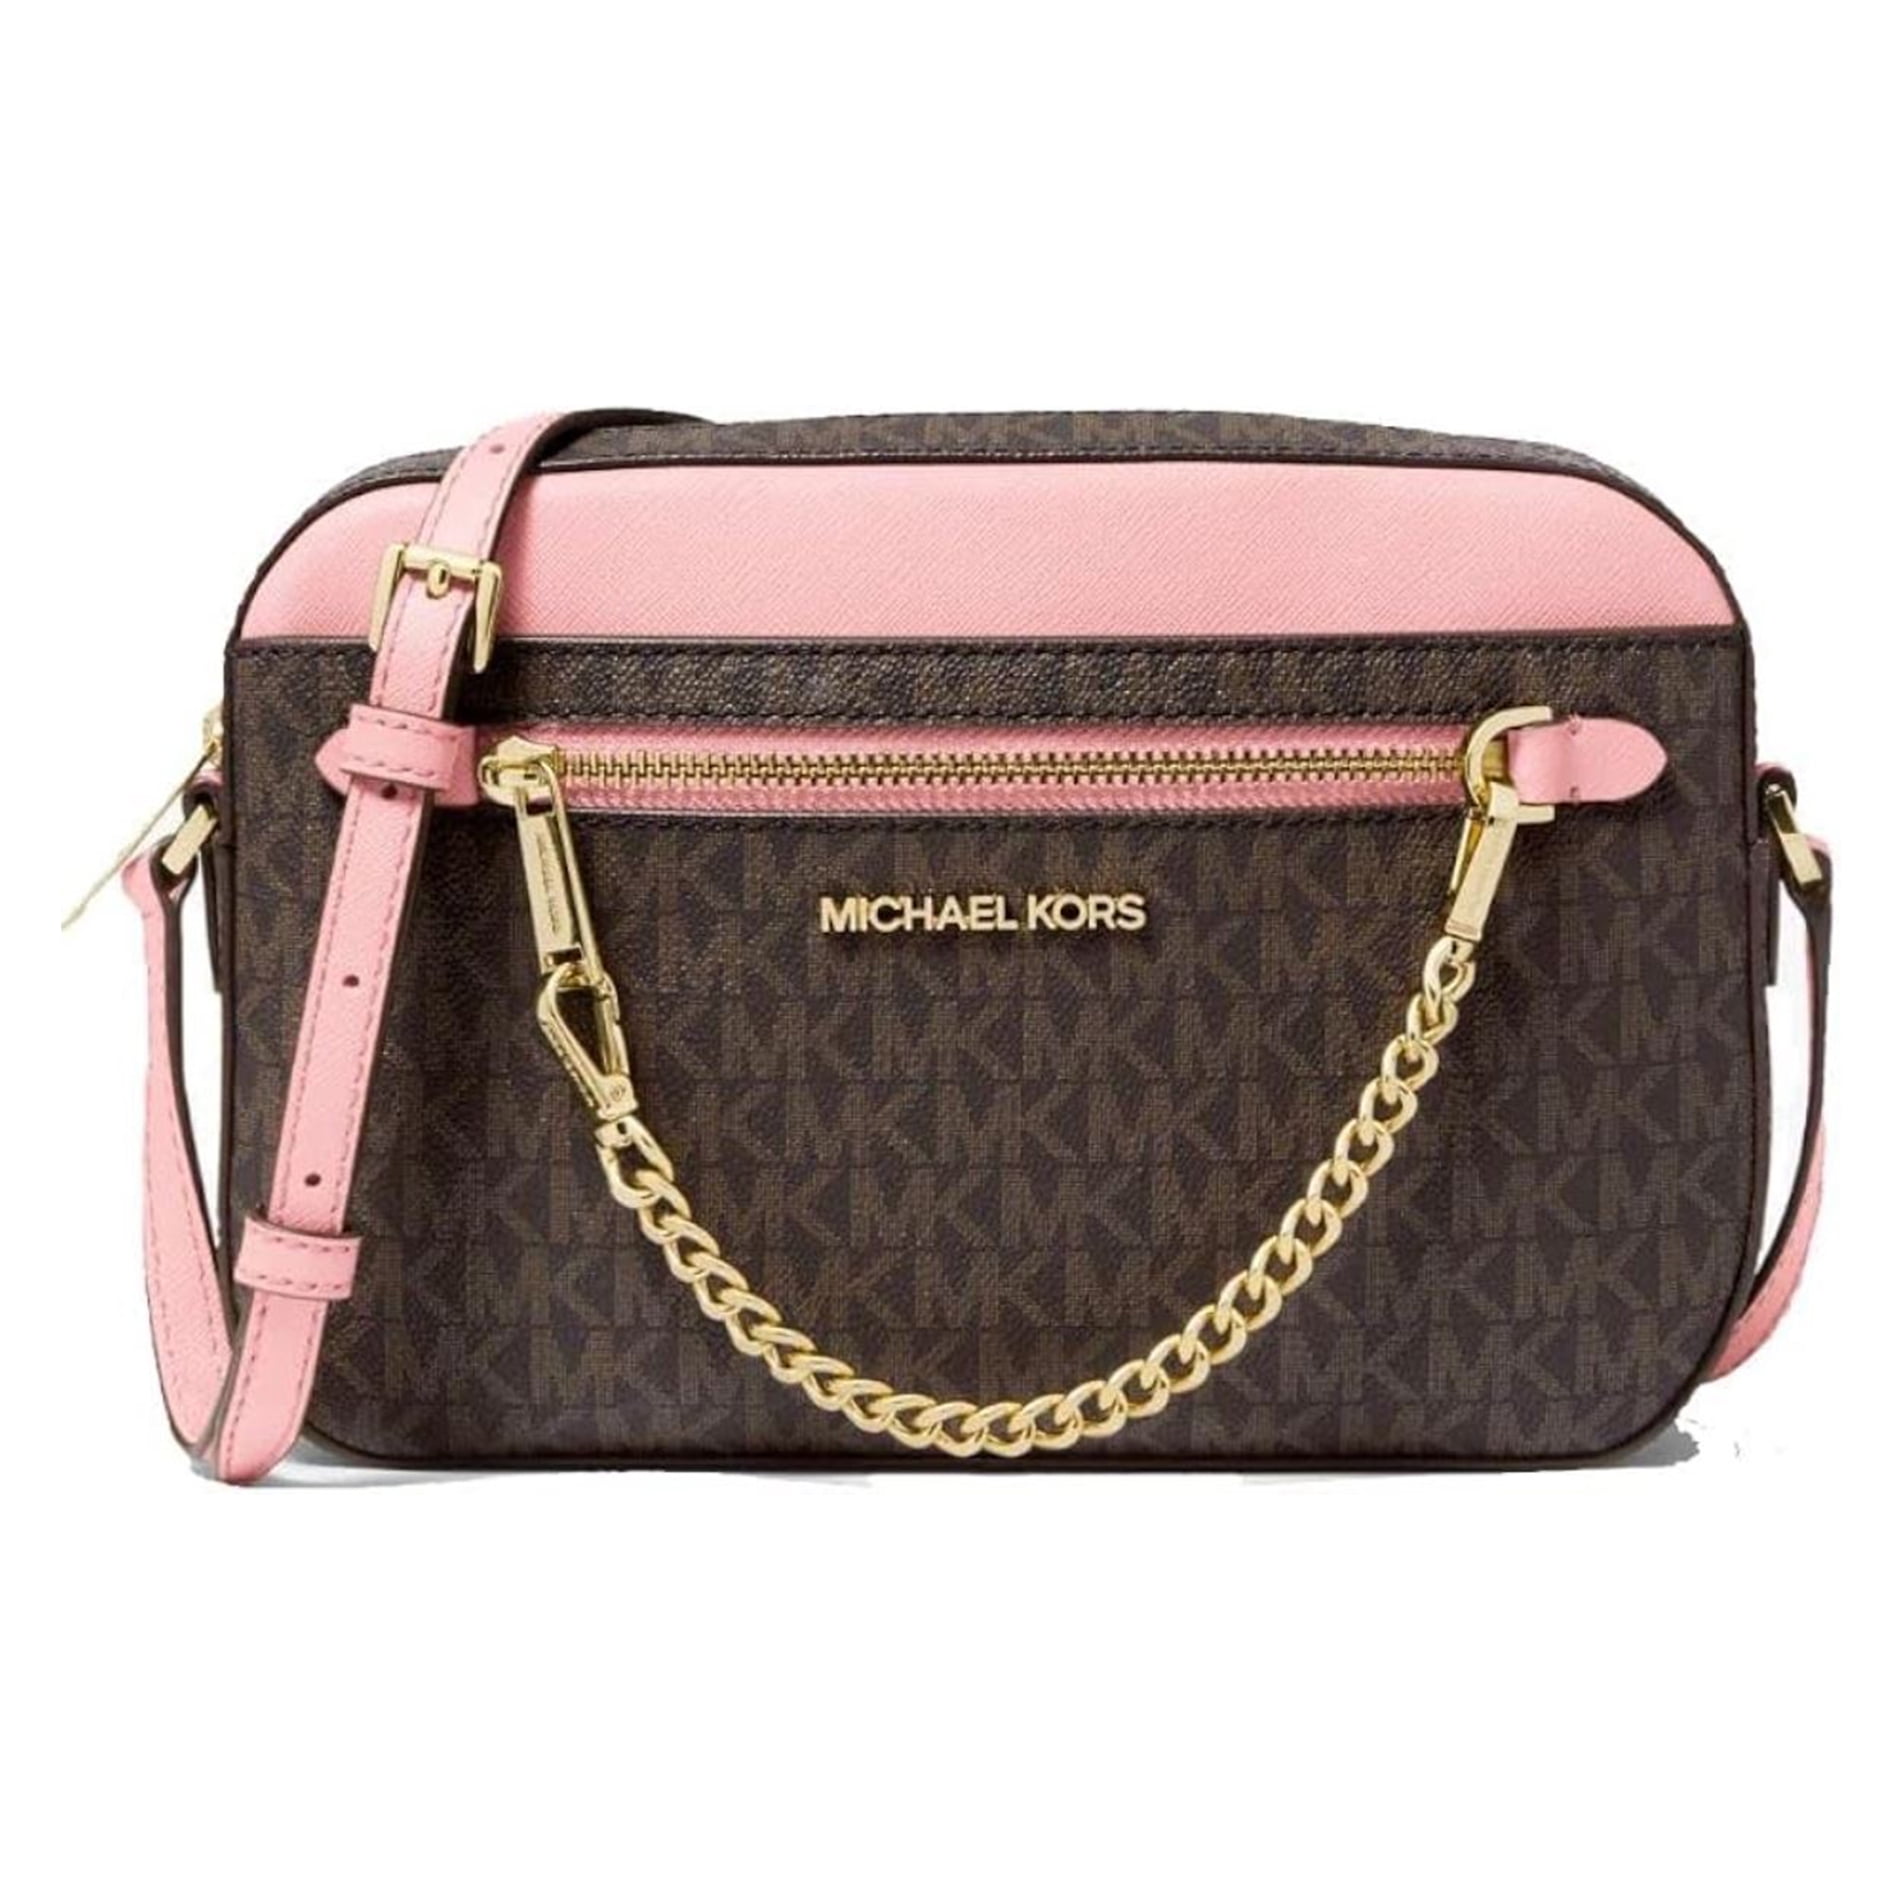 MICHAEL SS KOR Designer Clutch Bag 2023: Stylish Womens Shoulder Tote With  Wallet And Coin Purse From Doudoubag666, $60.08 | DHgate.Com